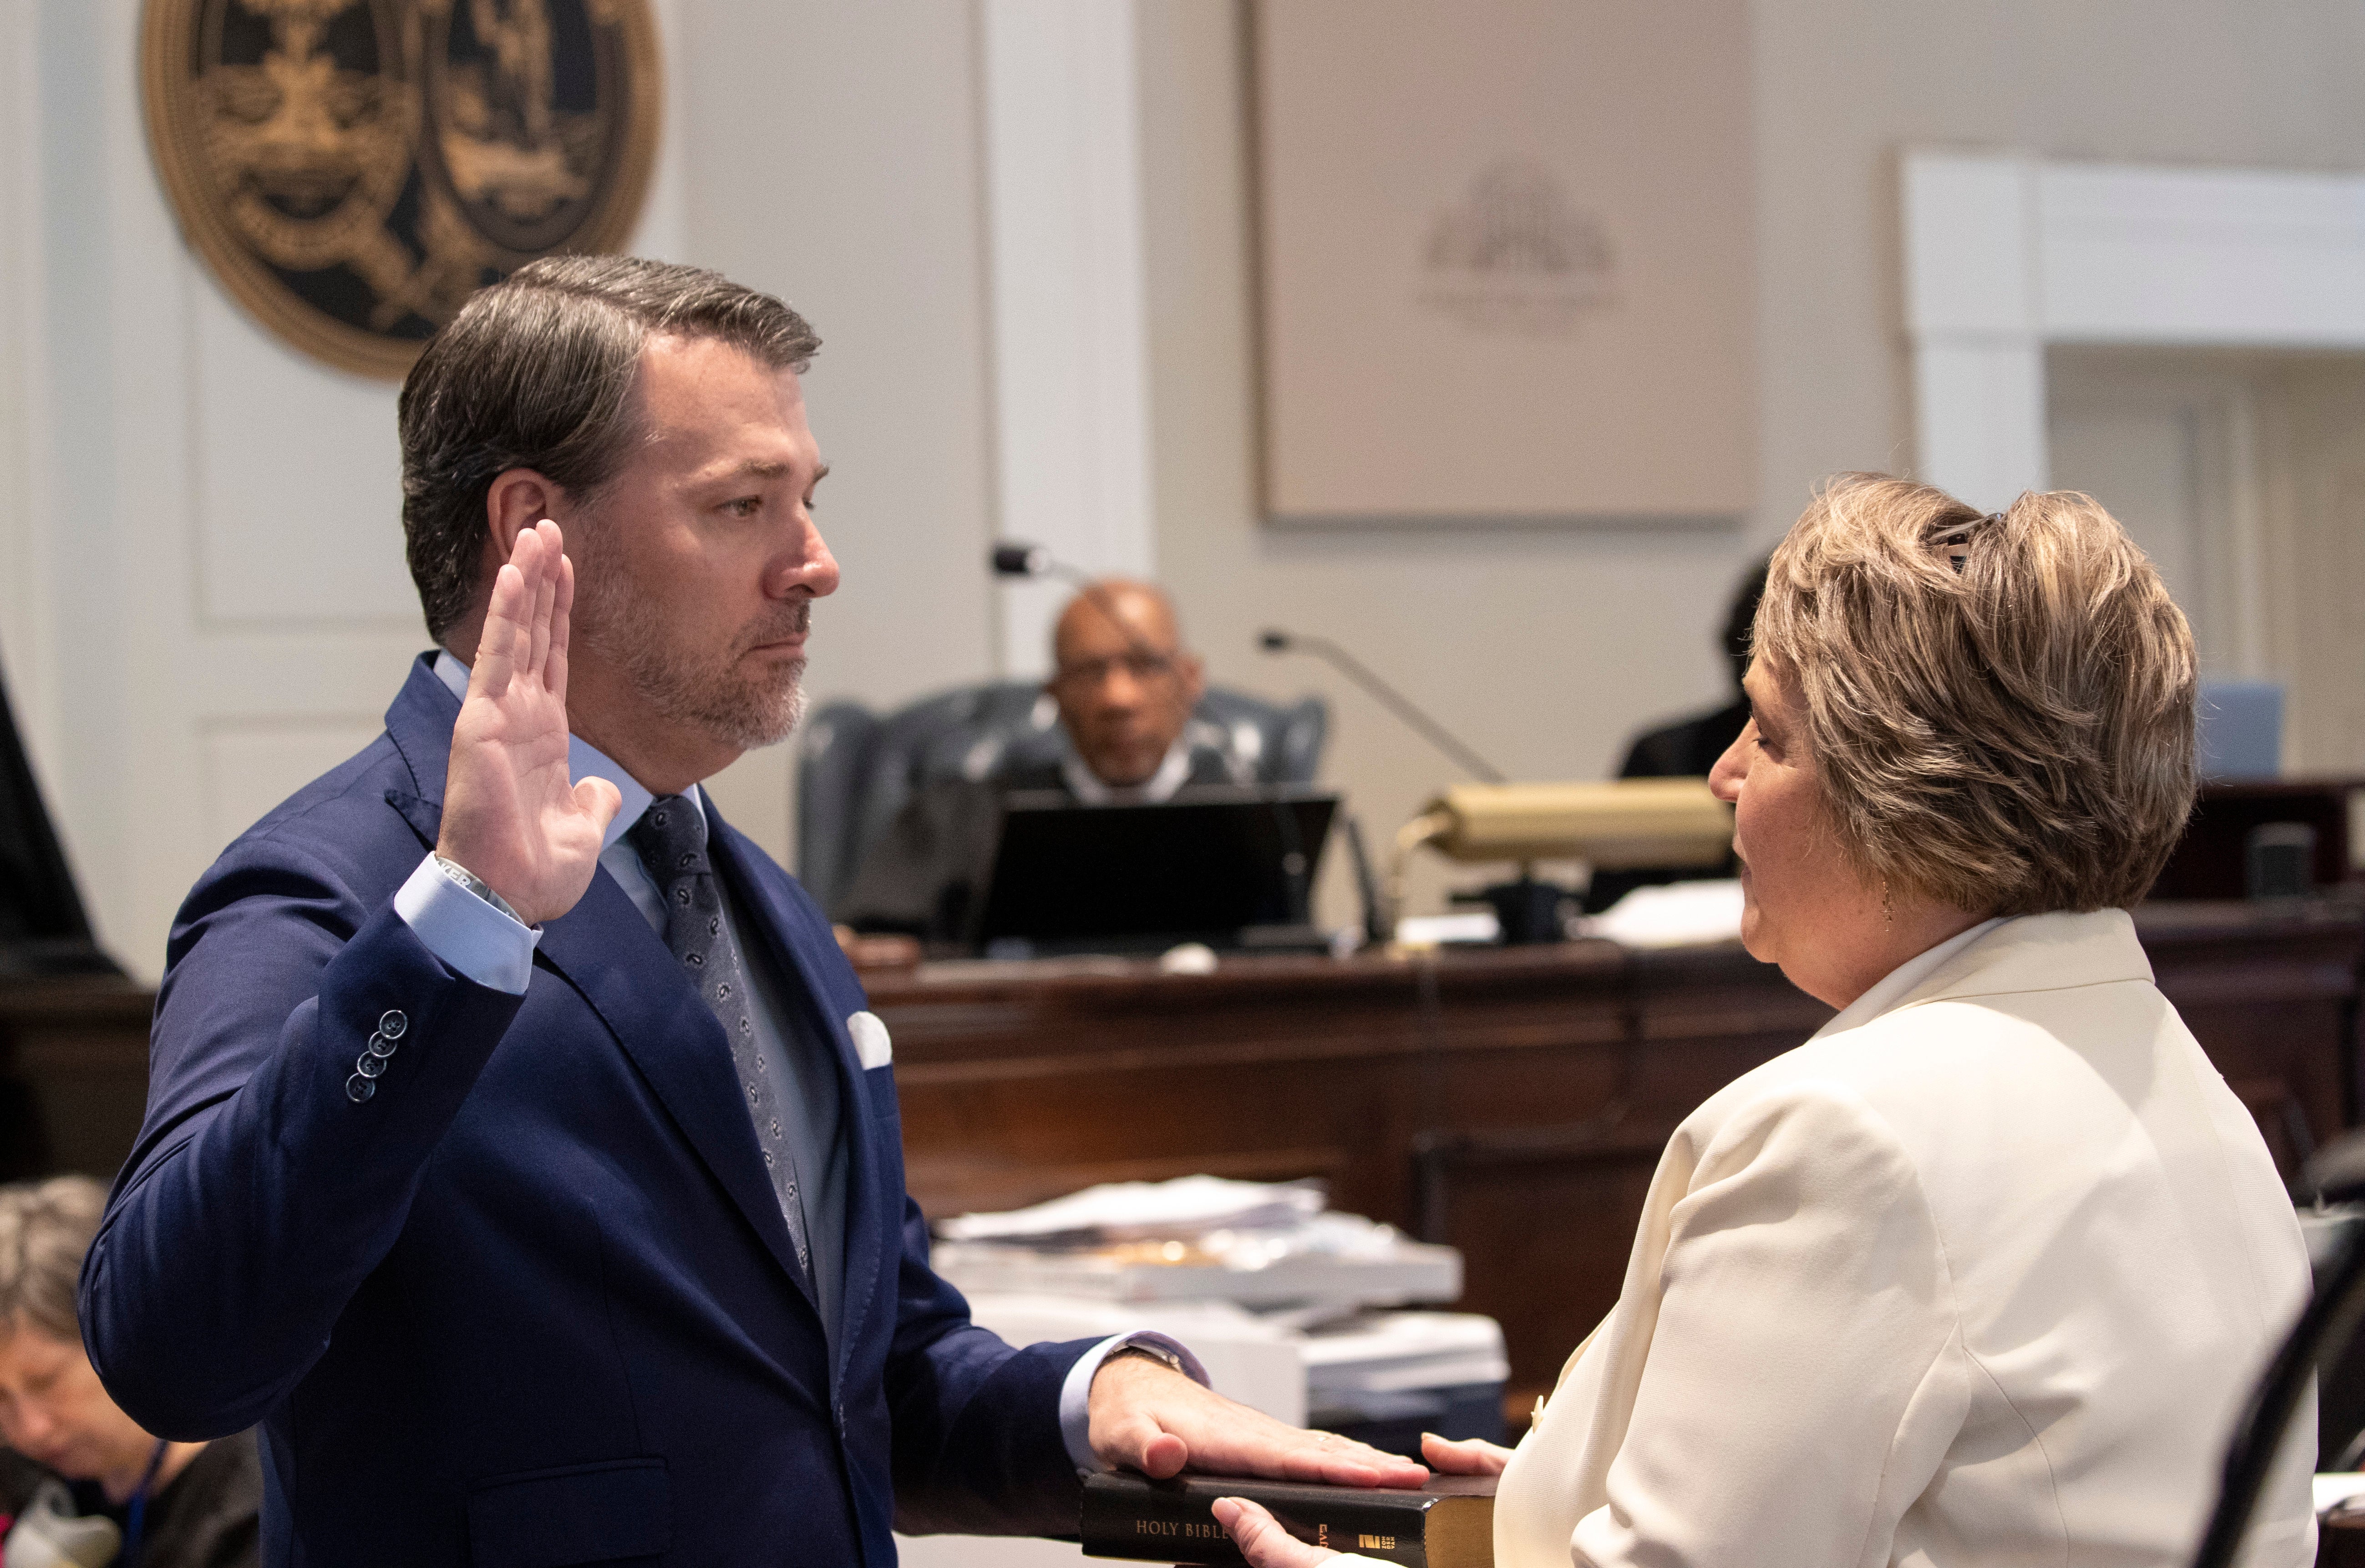 Michael Gunn, principle at Forge Consulting, gives the witness oath by Colleton County Clerk of Court Rebecca Hill at Murdaugh’s murder trial